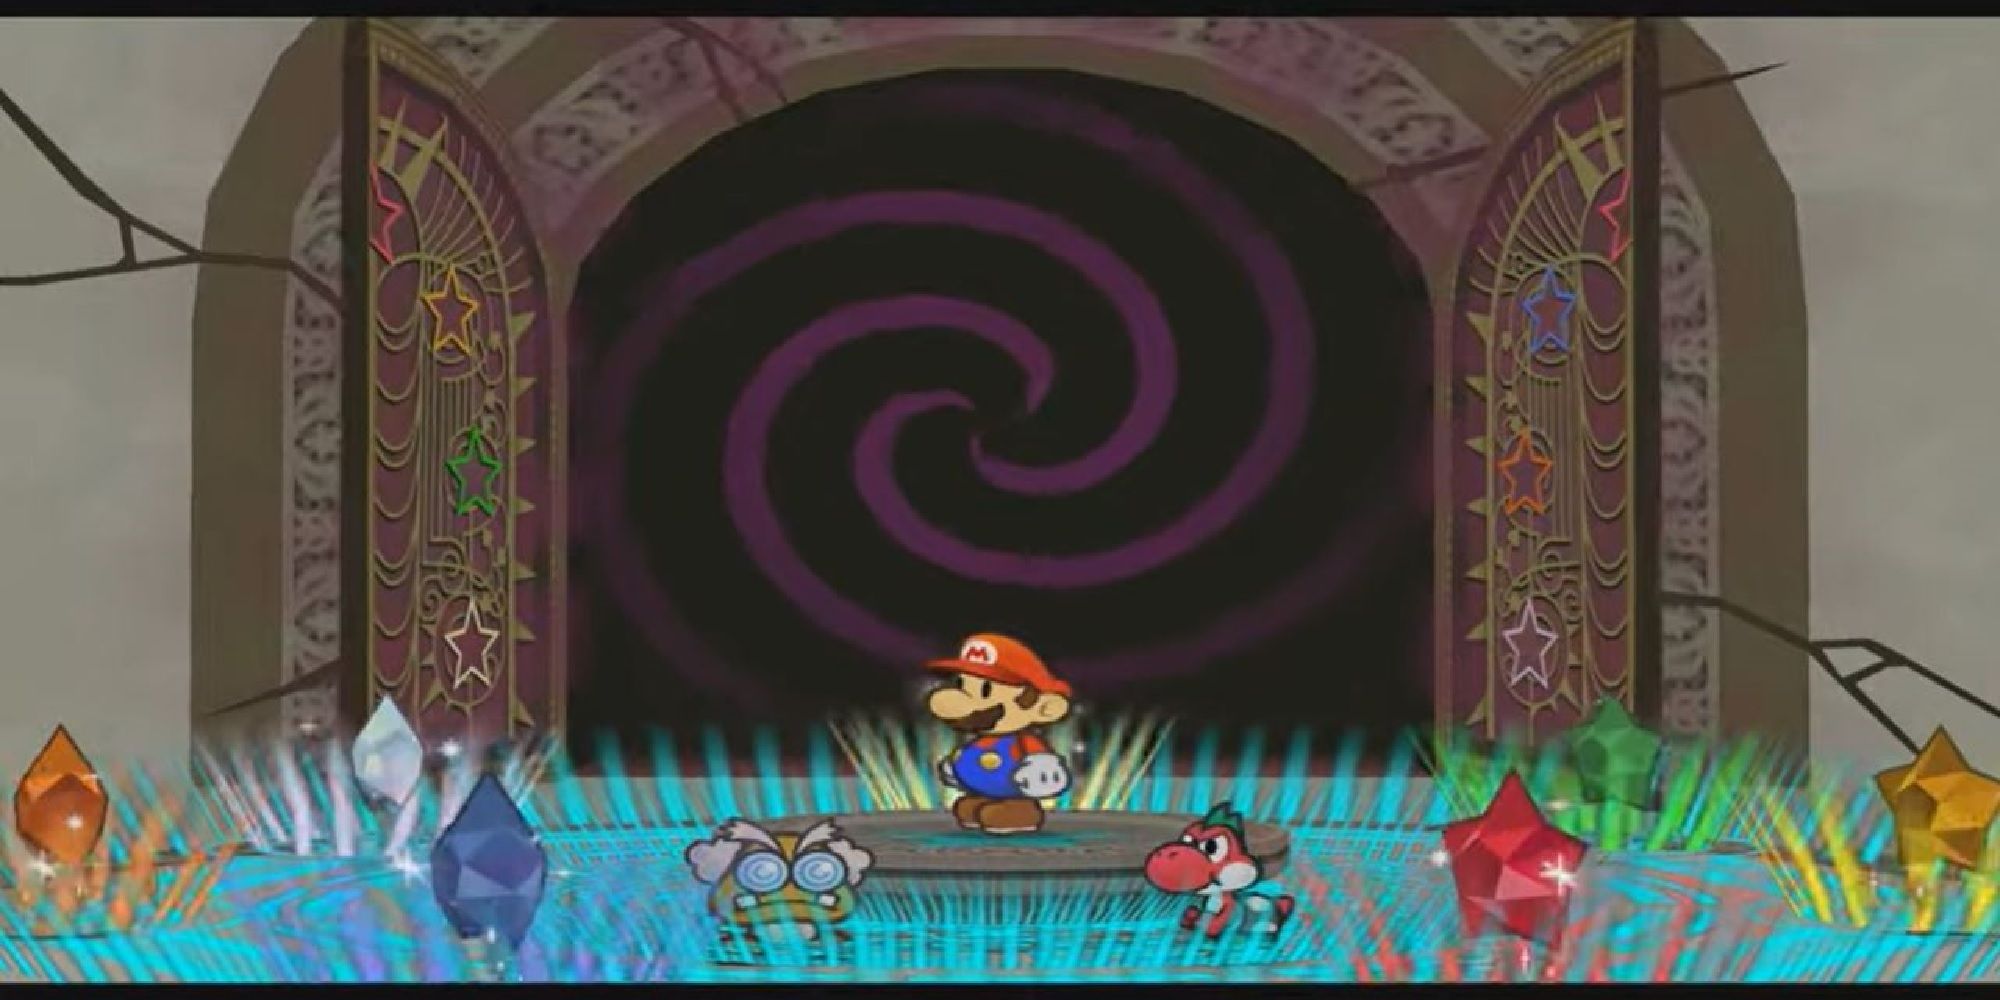 The thousand year door opens with purple smoke and magic swirling into an ominous darkness while Mario watches.